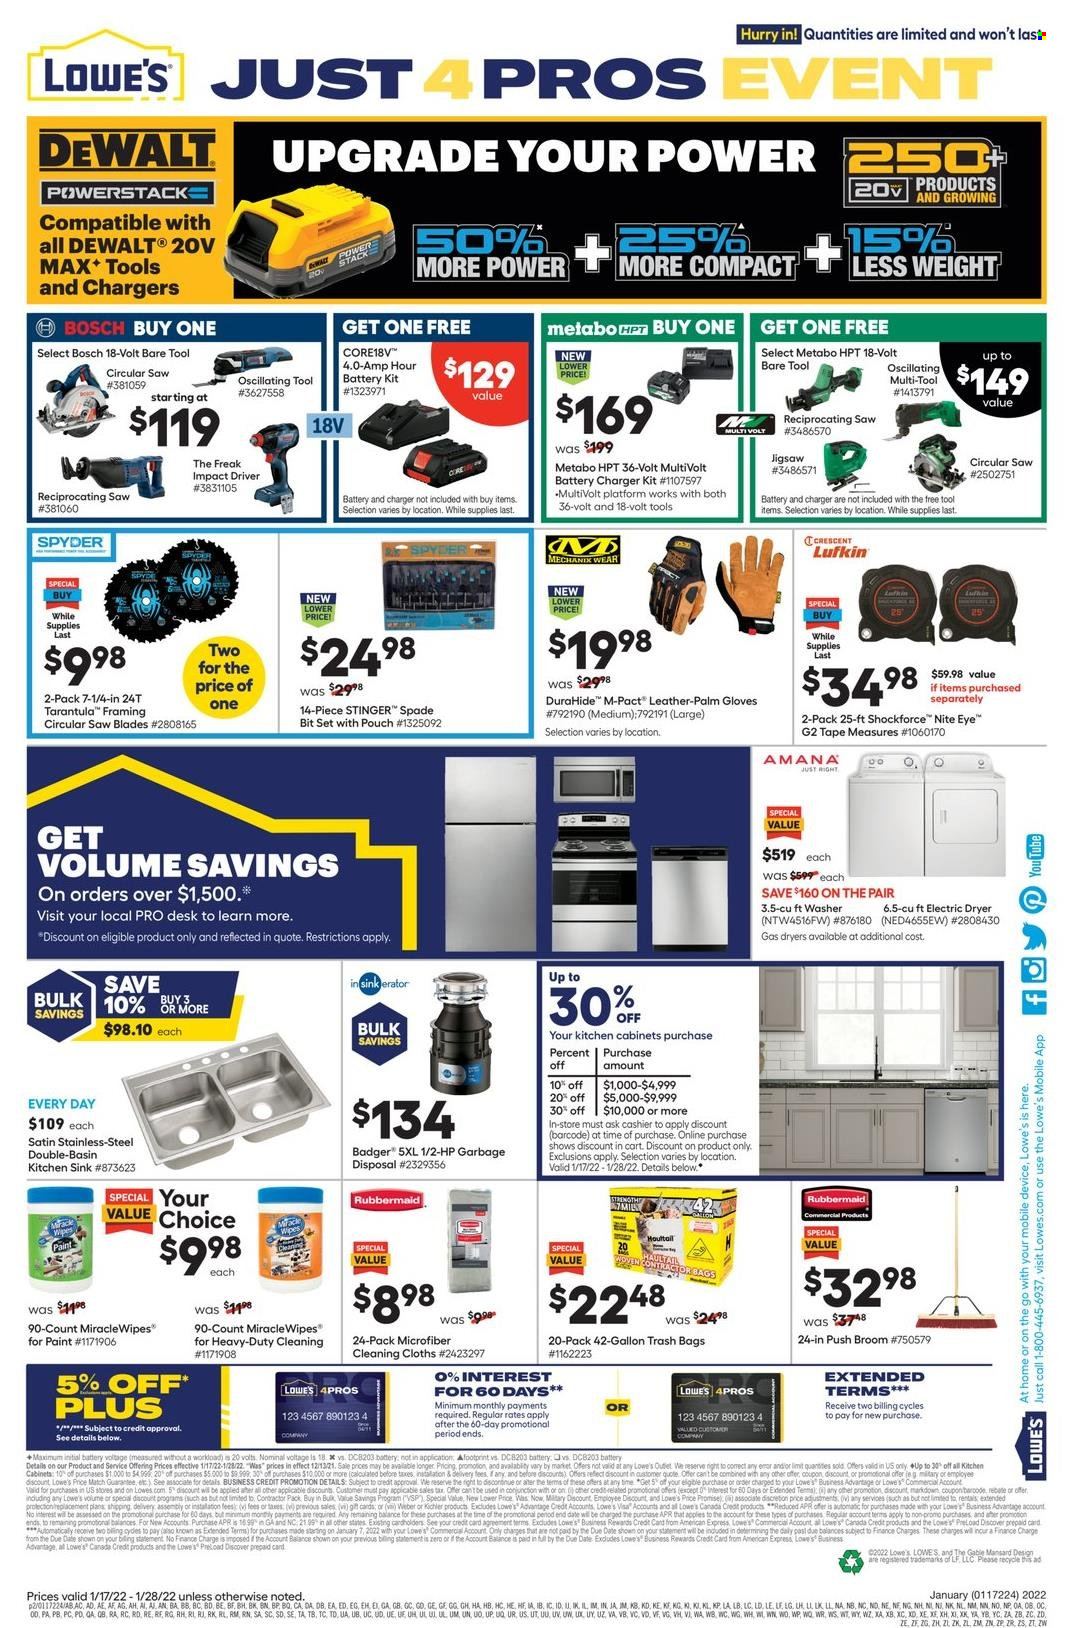 thumbnail - Lowe's Flyer - 01/17/2022 - 01/28/2022 - Sales products - DeWALT, Crest, trash bags, broom, battery charger, Hewlett Packard, Bosch, Amana, washing machine, electric dryer, kitchen cabinet, desk, sink, paint, impact driver, circular saw blade, reciprocating saw, measuring tape, work gloves, cart, Weber. Page 2.